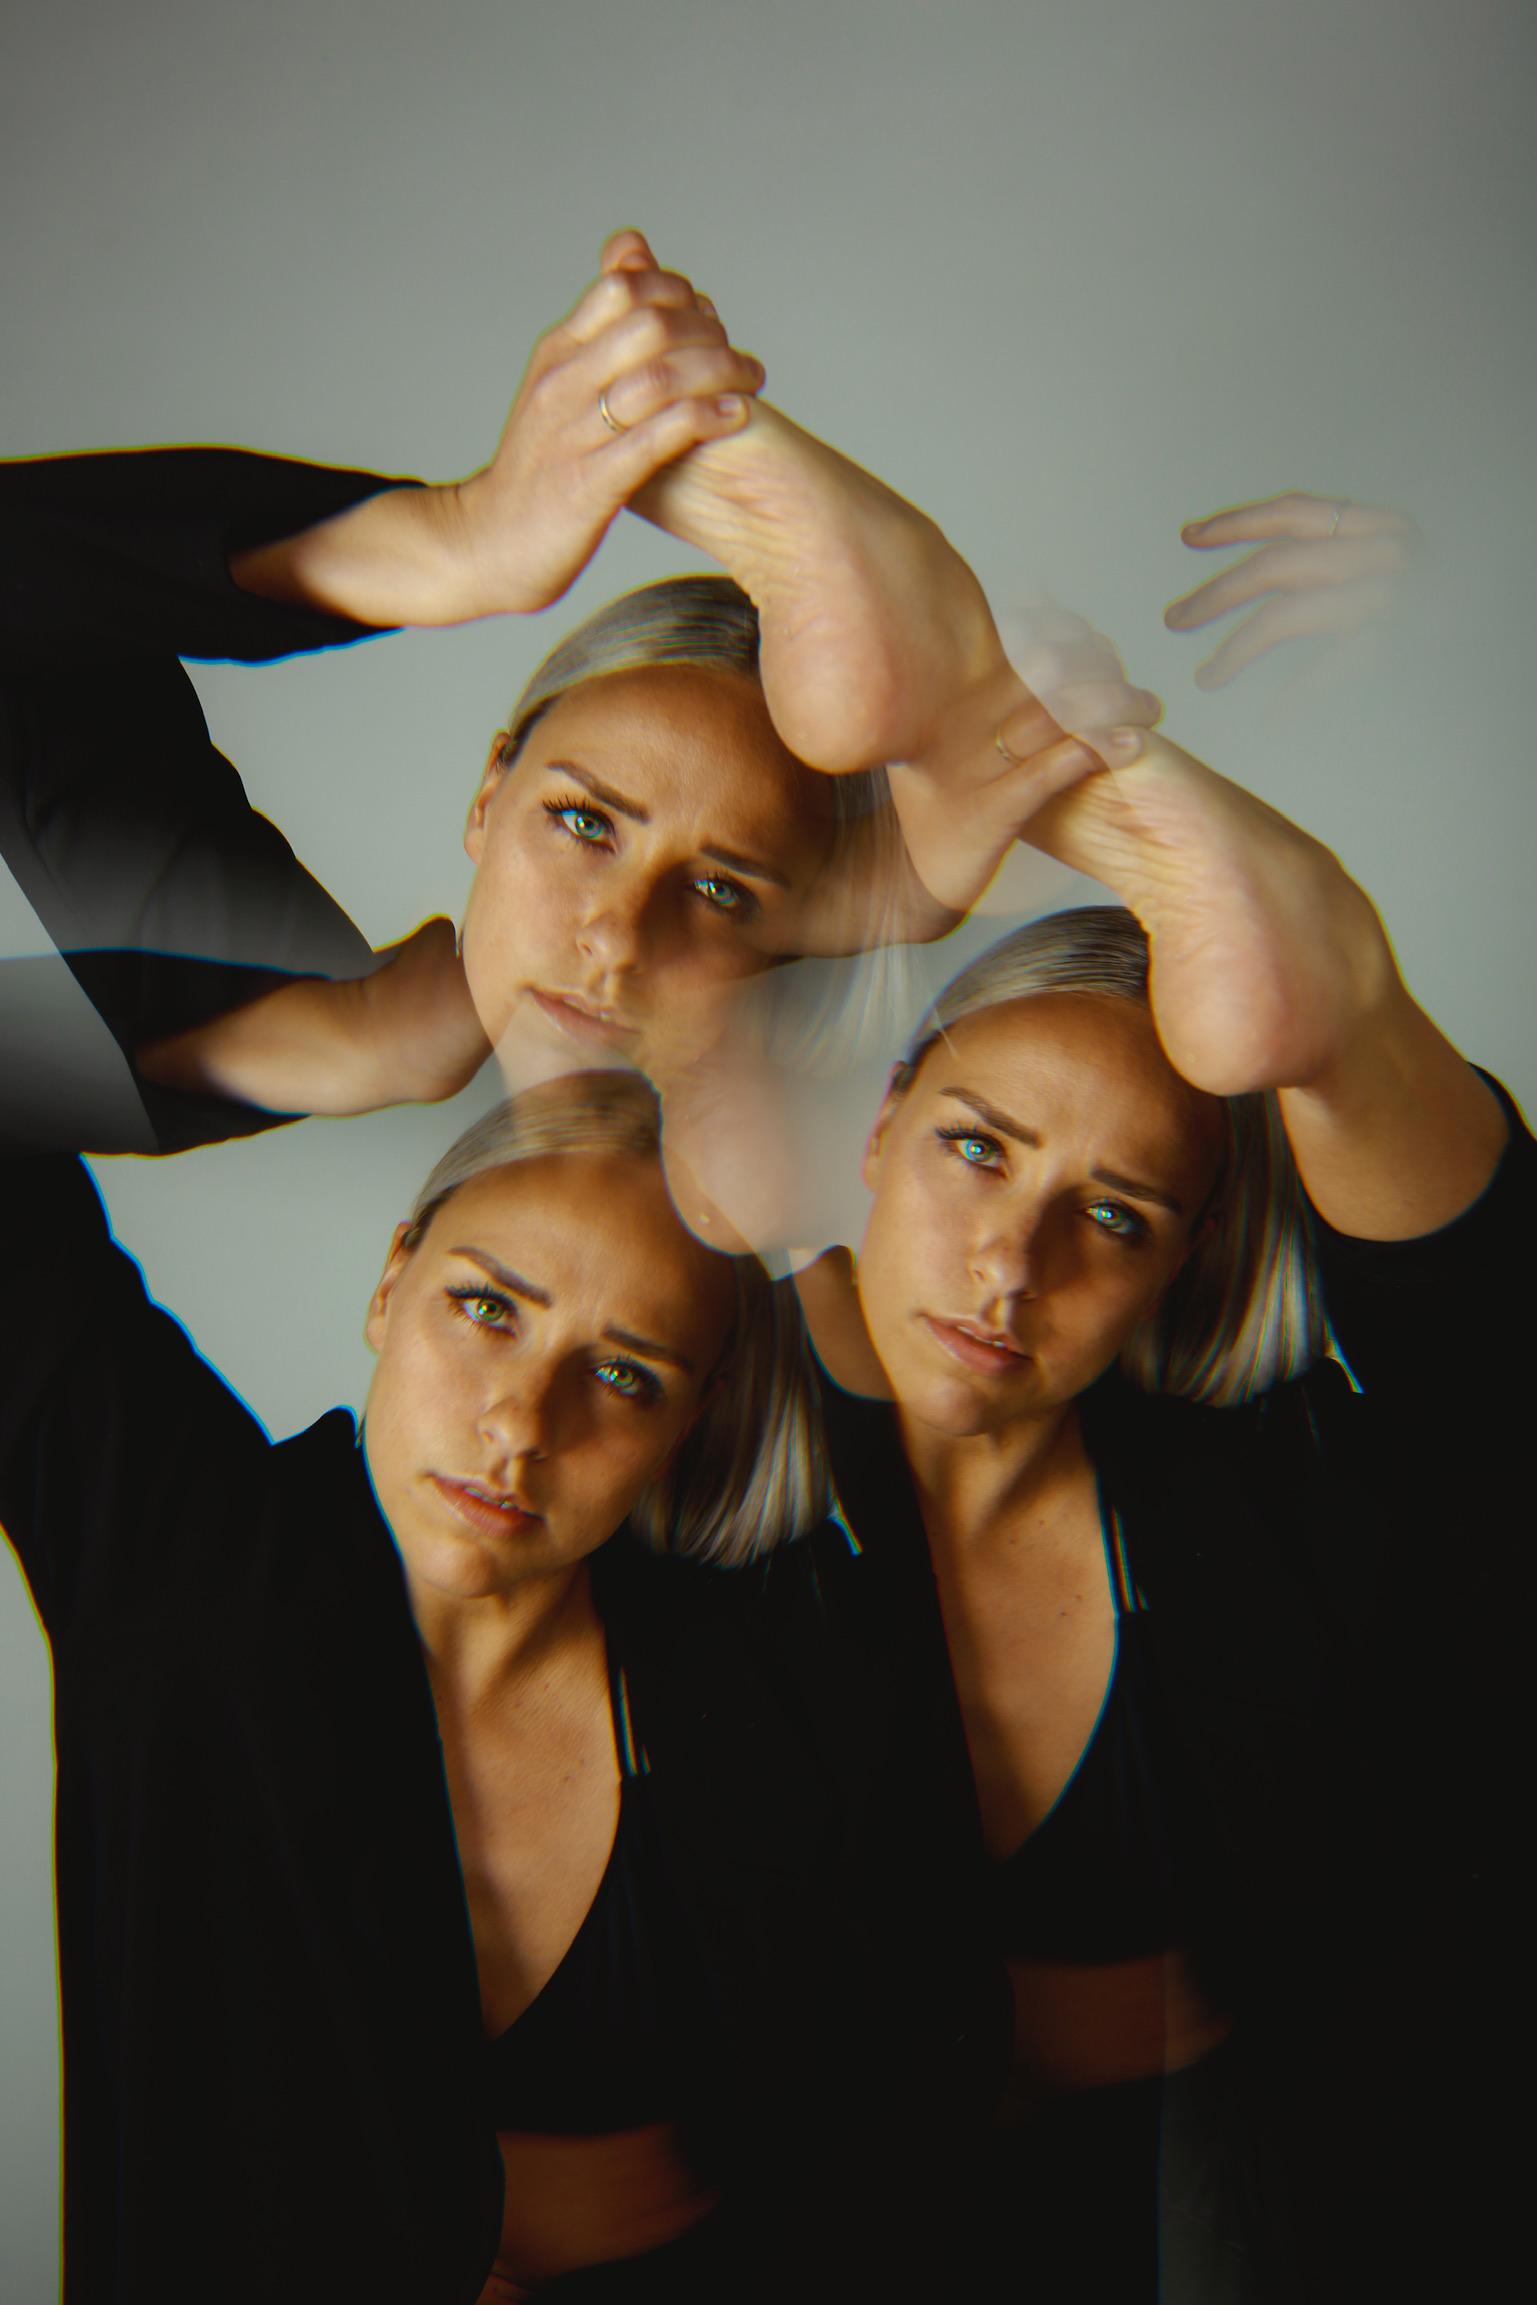 a kaleidoscope edited image of a dancer with blonde hair and a black outfit holding their foot above their head 